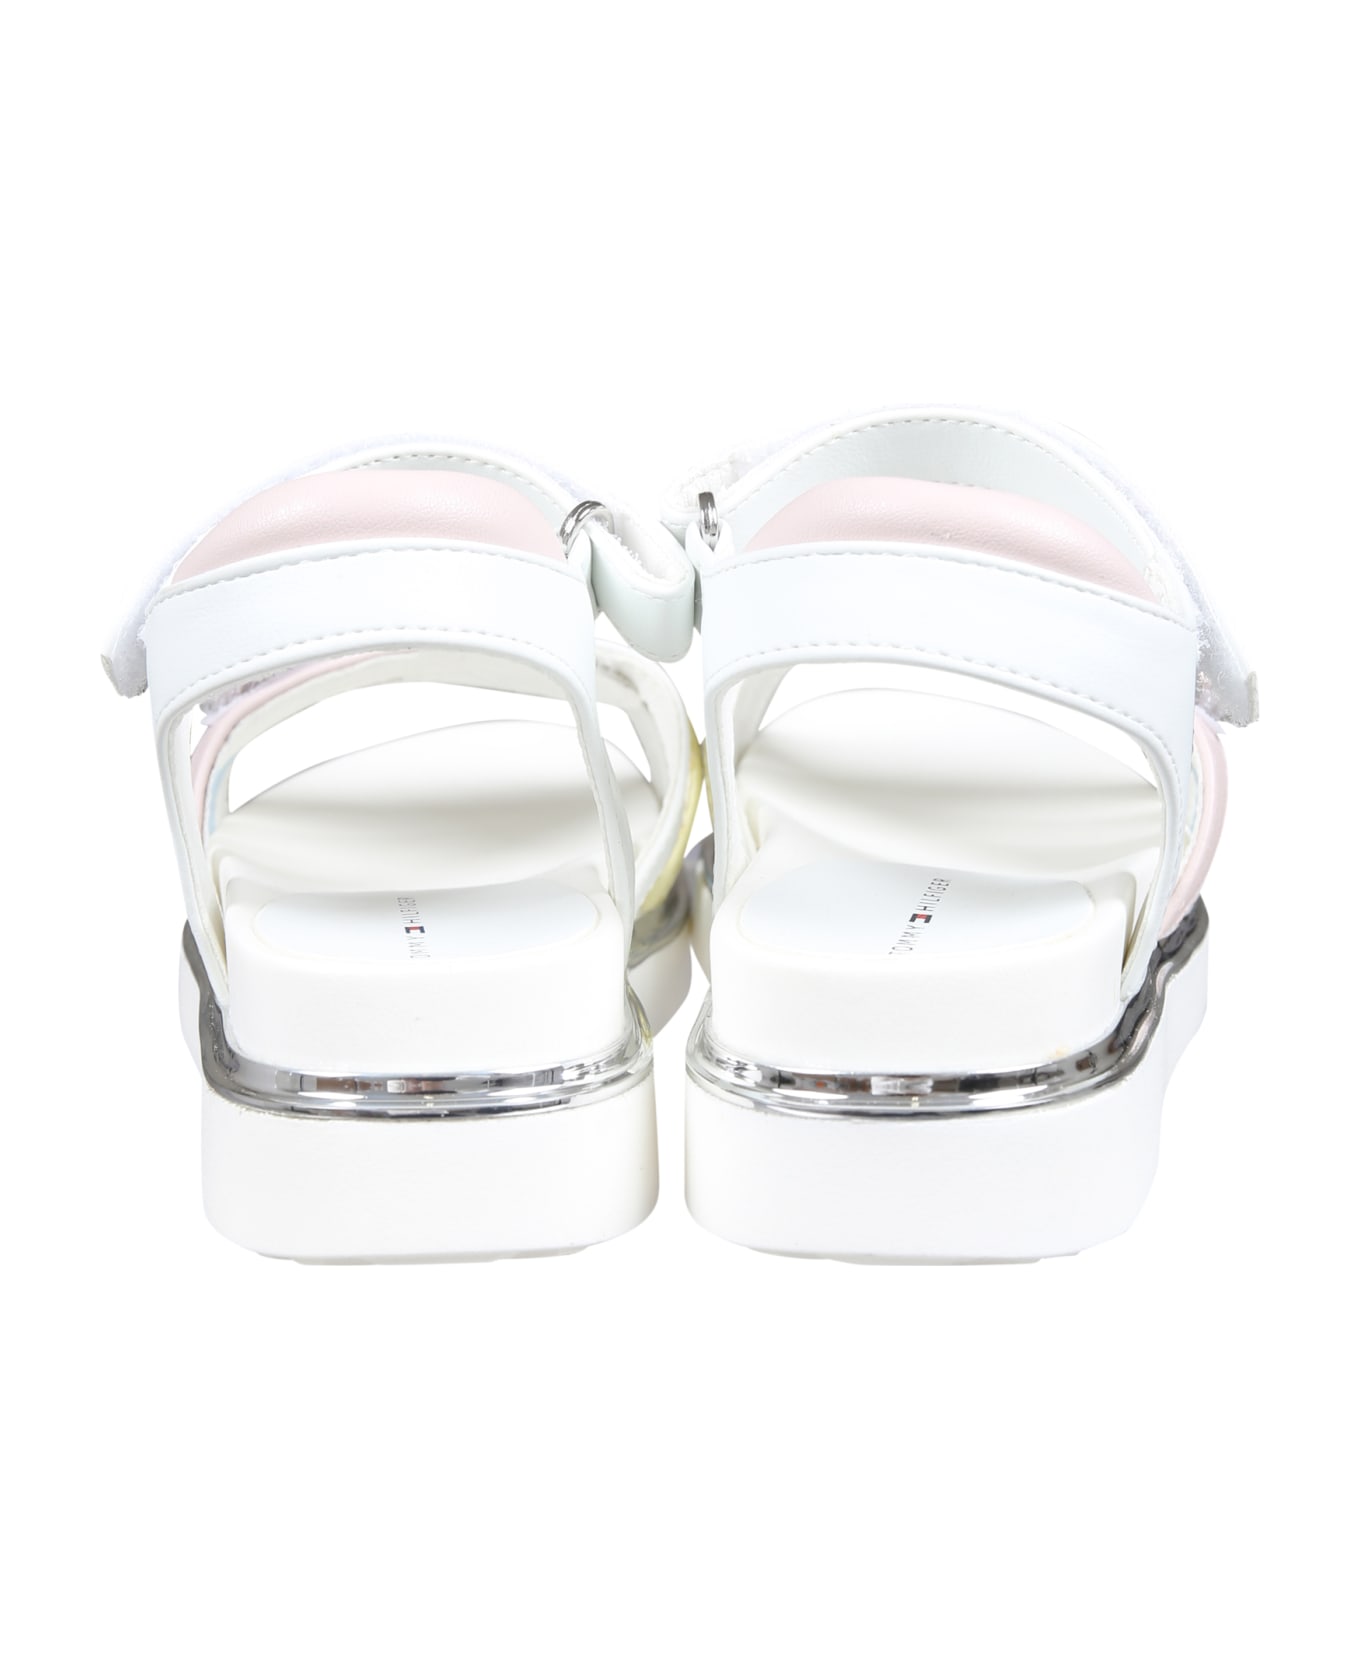 Tommy Hilfiger White Sandals For Girl With Logo - White シューズ